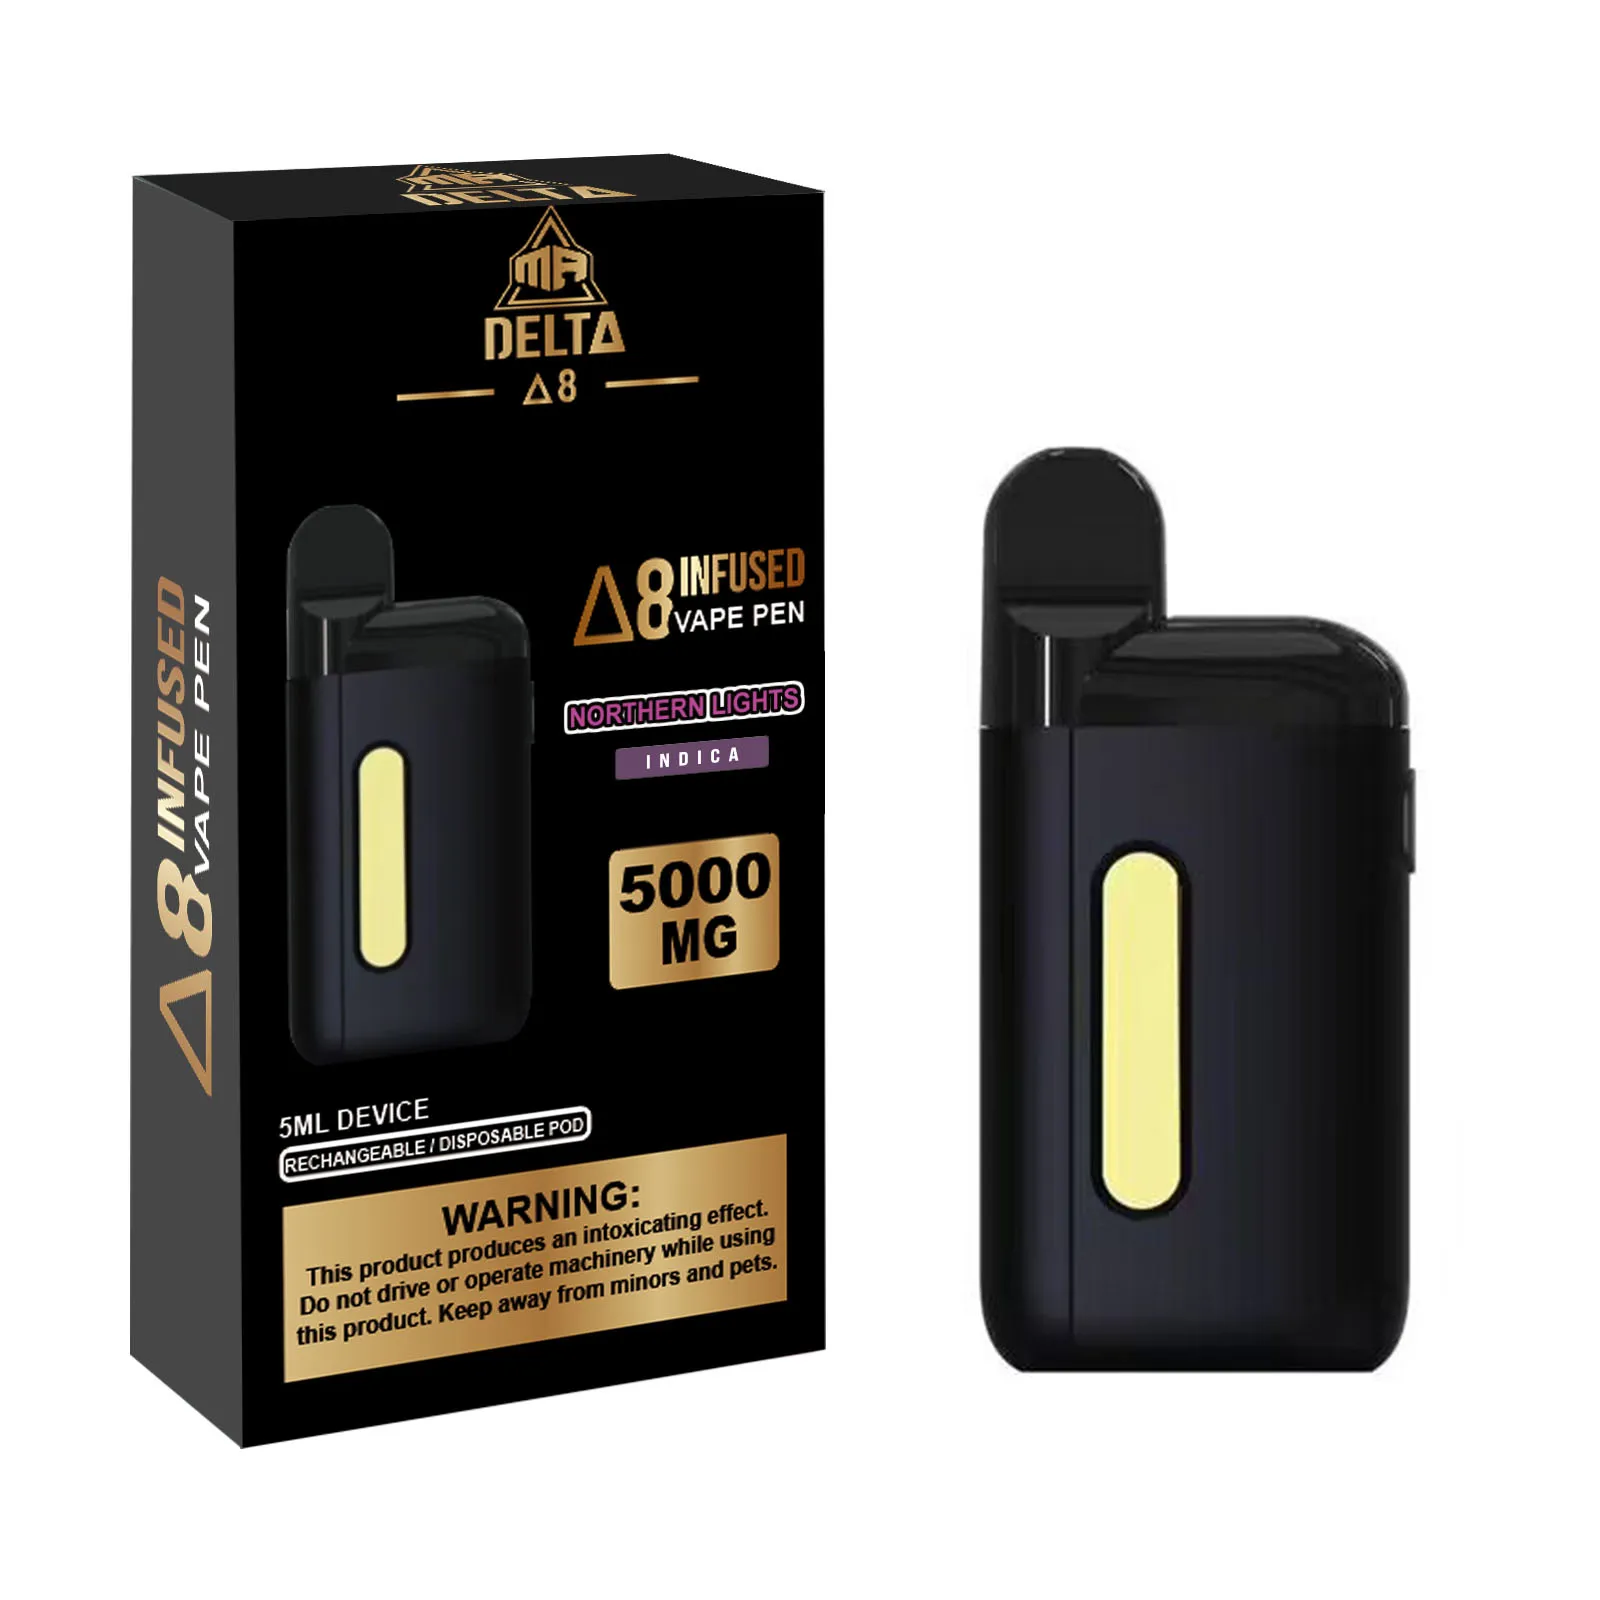 Mr delta D8 oil 5ml disposable vape pens with 5000mg D8 oil thick oil prefilled ship From Miami